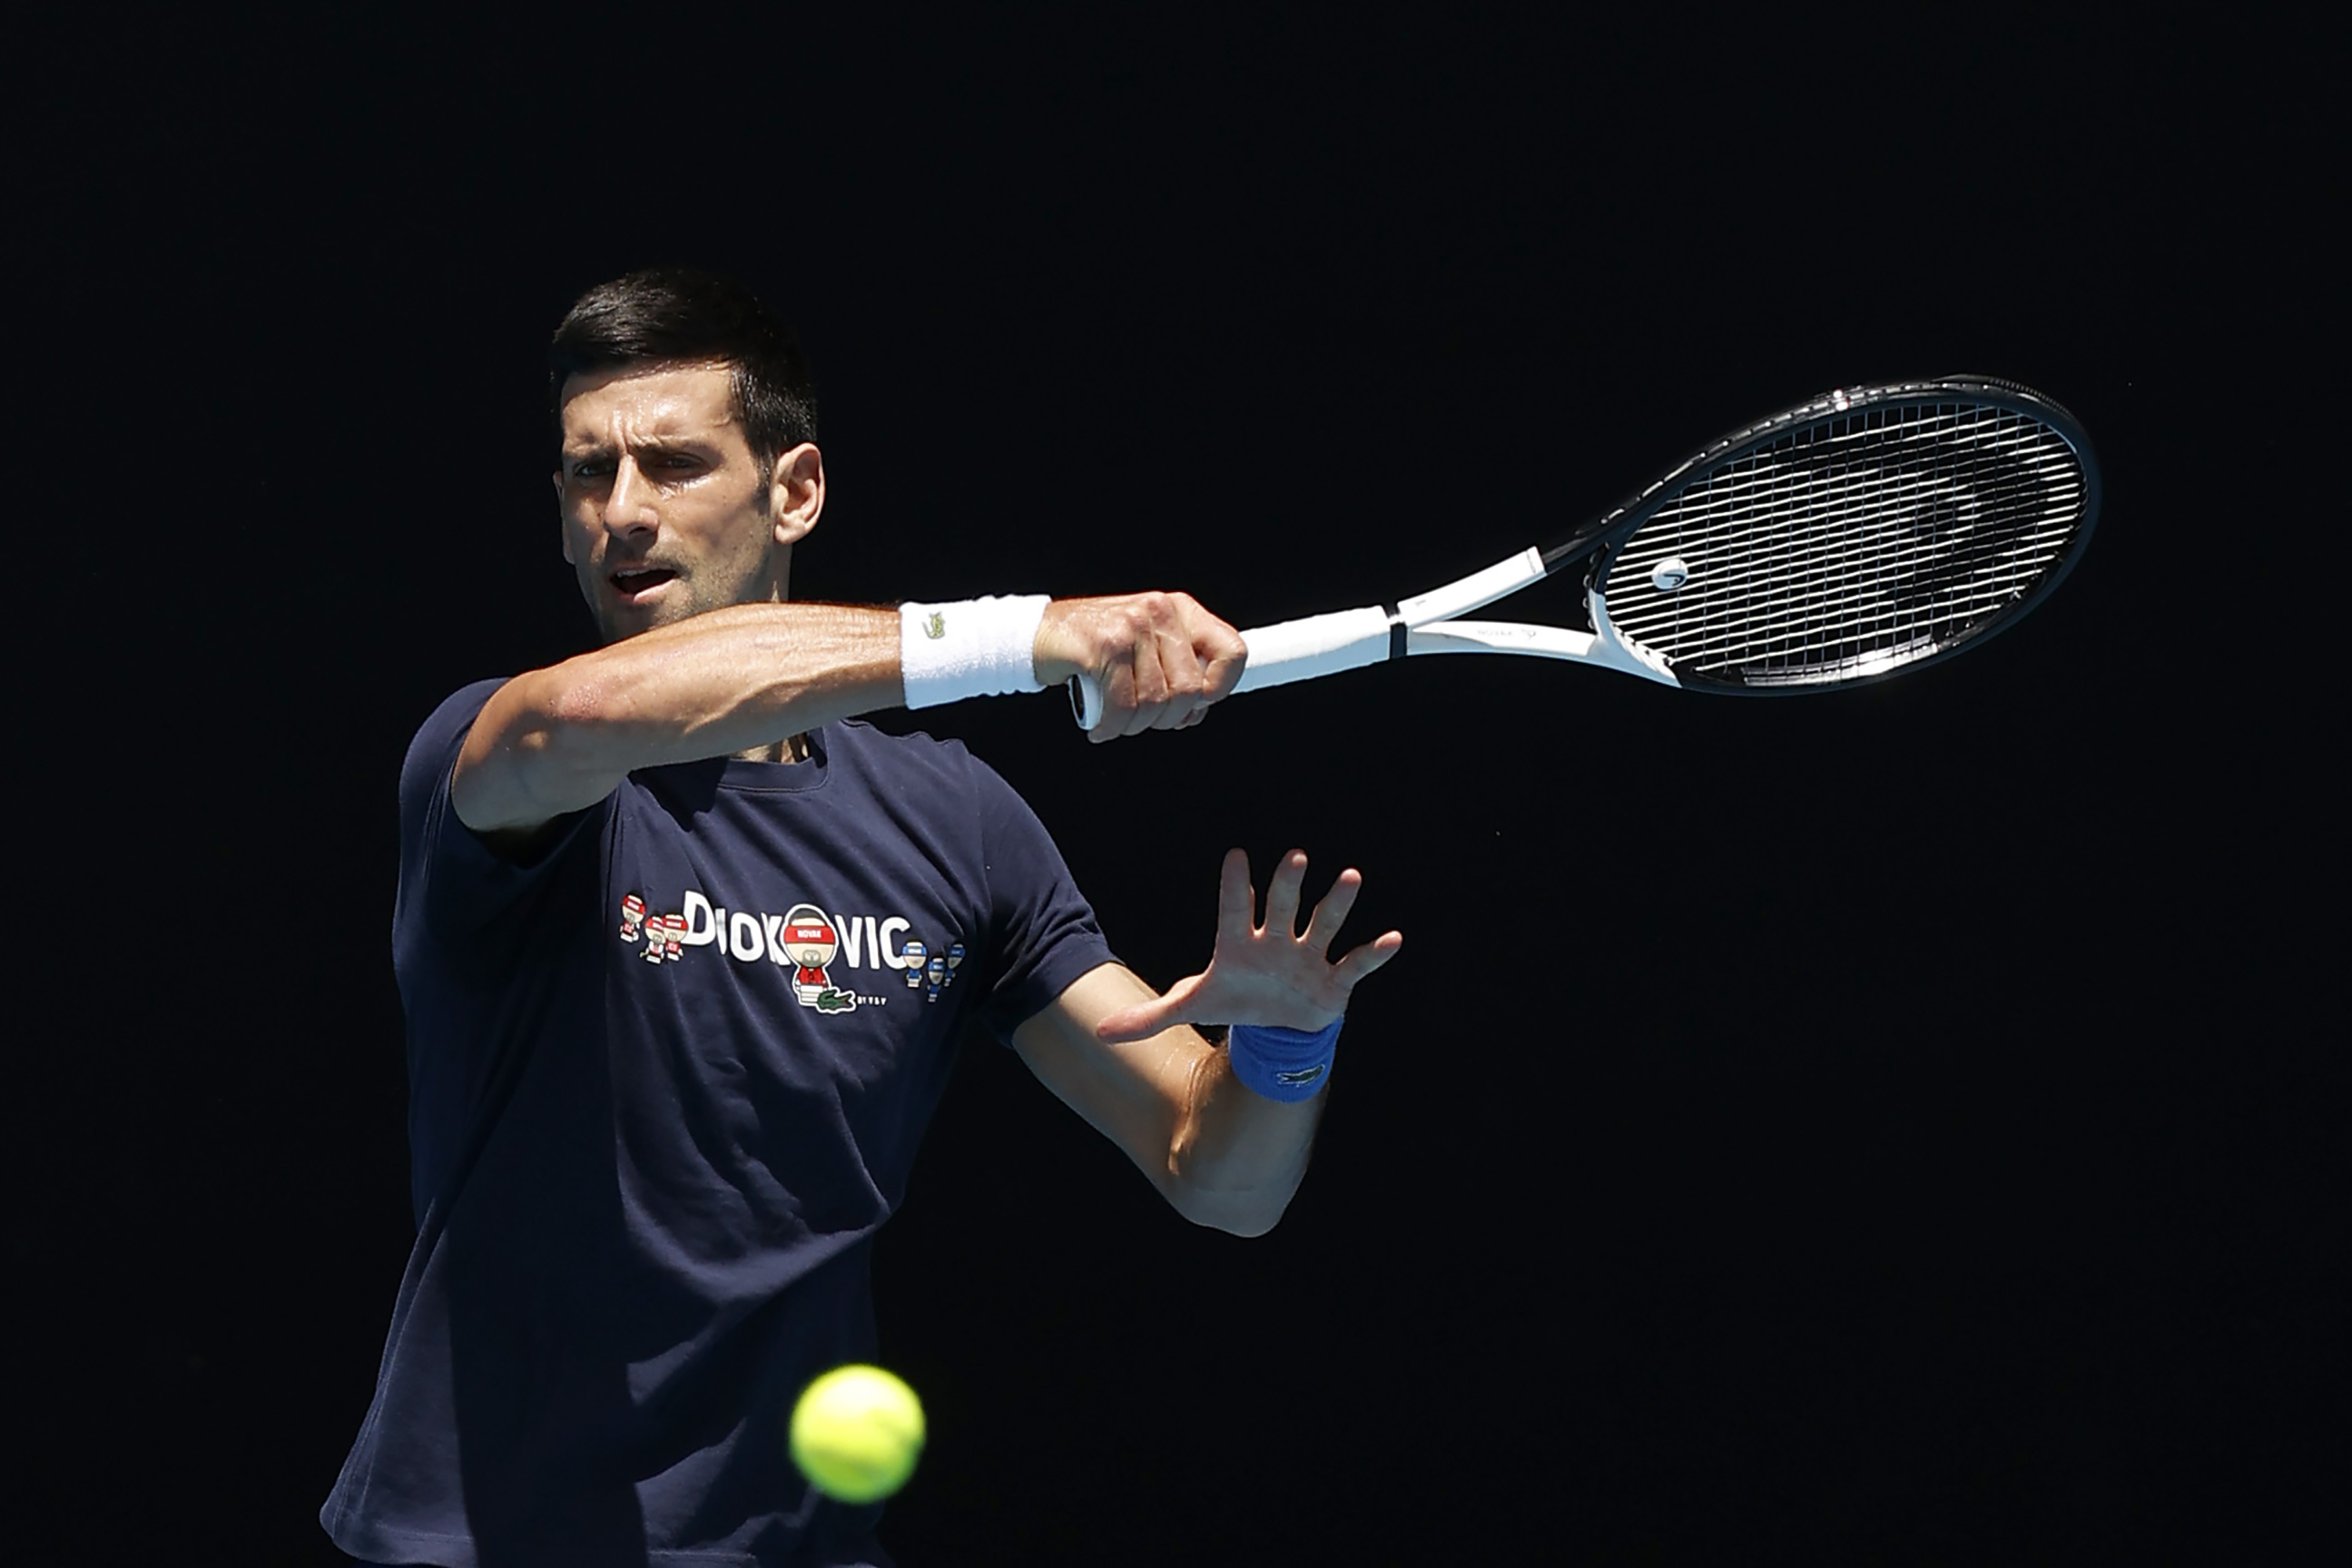 Novak Djokovic has been training since his release from detention on Monday.